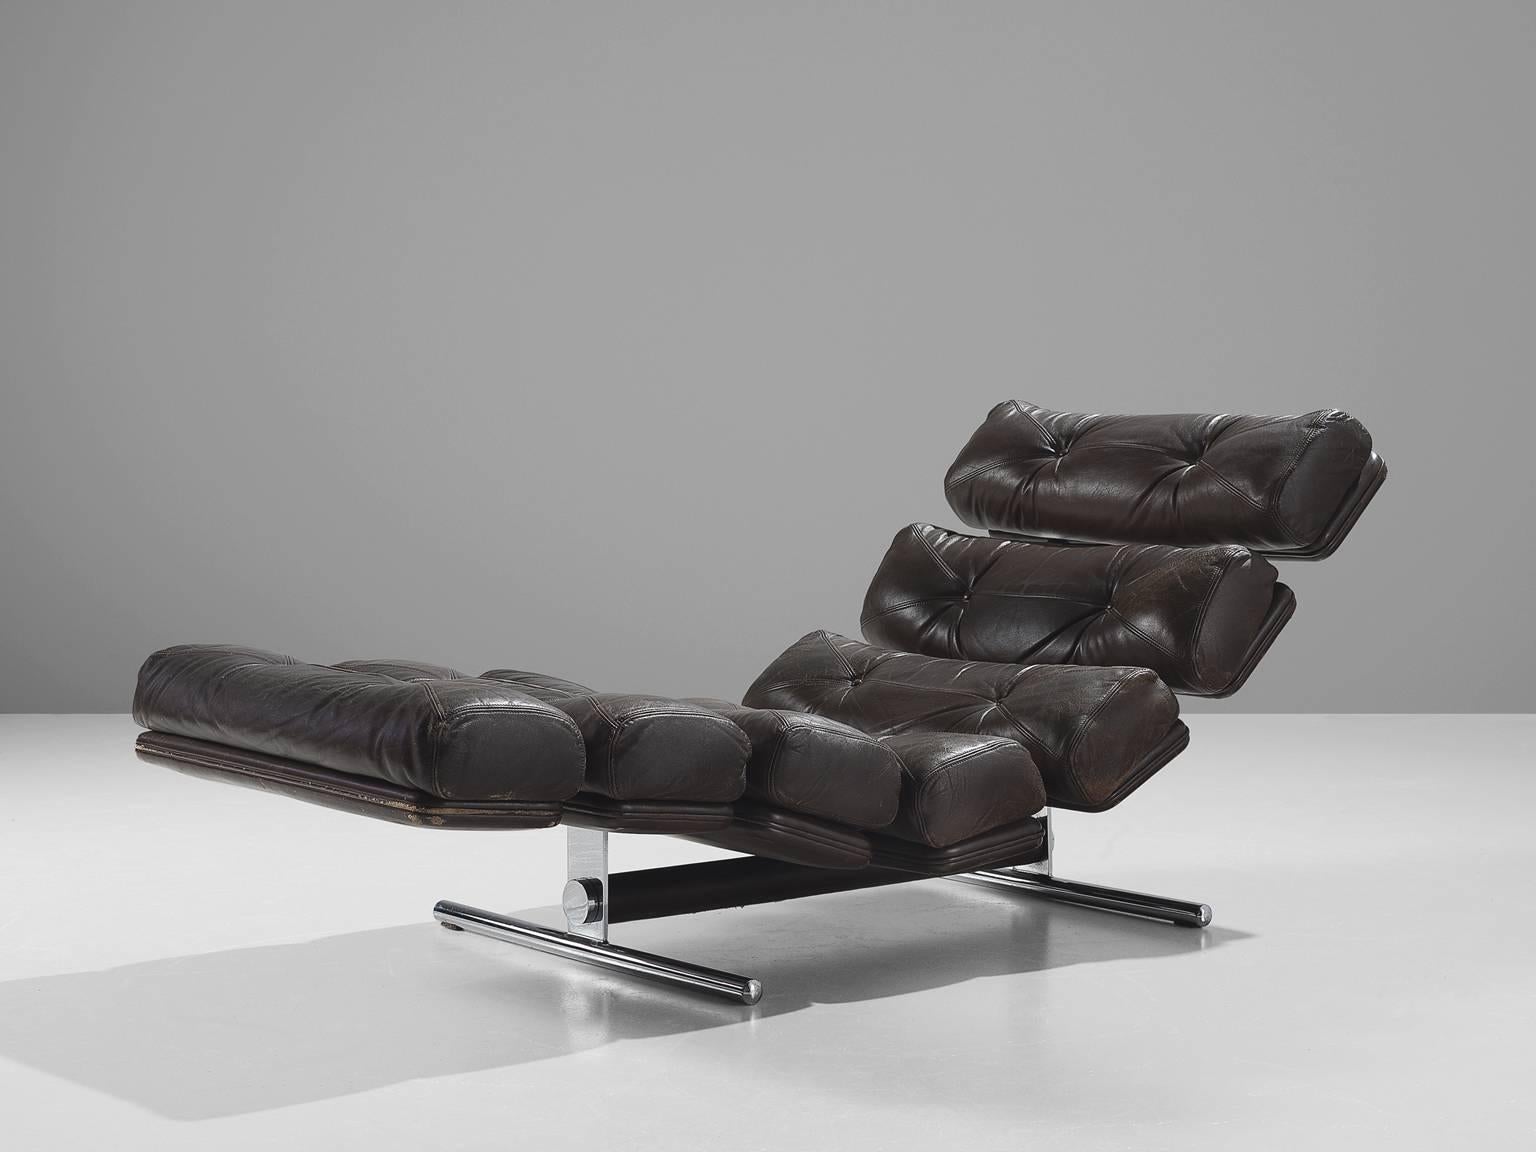 Chaise longue model 'Lord,' in original and steel, by Ric Deforche for Gervan, Belgium, 1970.

Fantastic daybed in dark brown original patinated leather and steel. This design dates from the 1970s. The segmented seating gives this lounge chair a